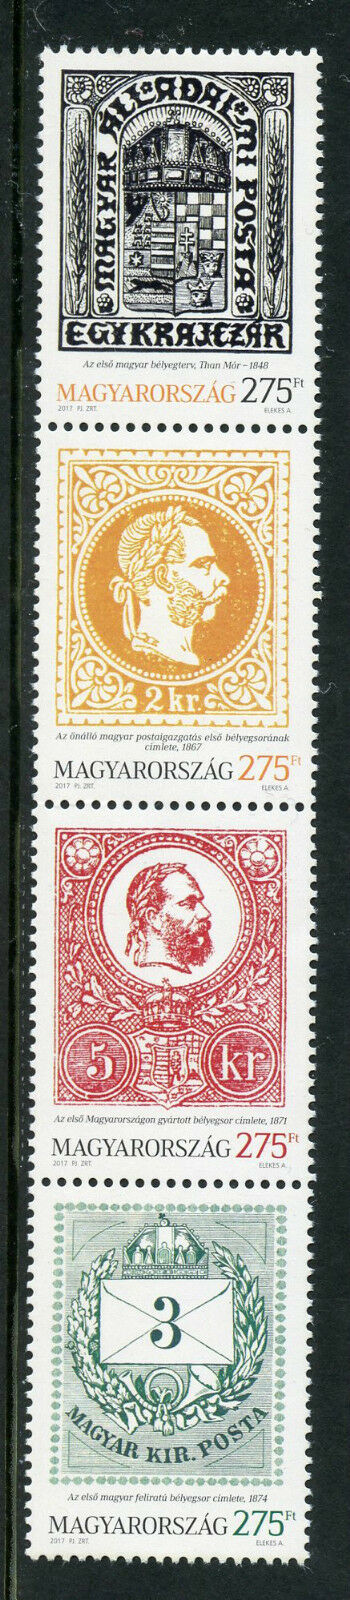 Hungary 2017 MNH Hungarian Stamp Issuance 150 Years 4v Strip Stamps on Stamps